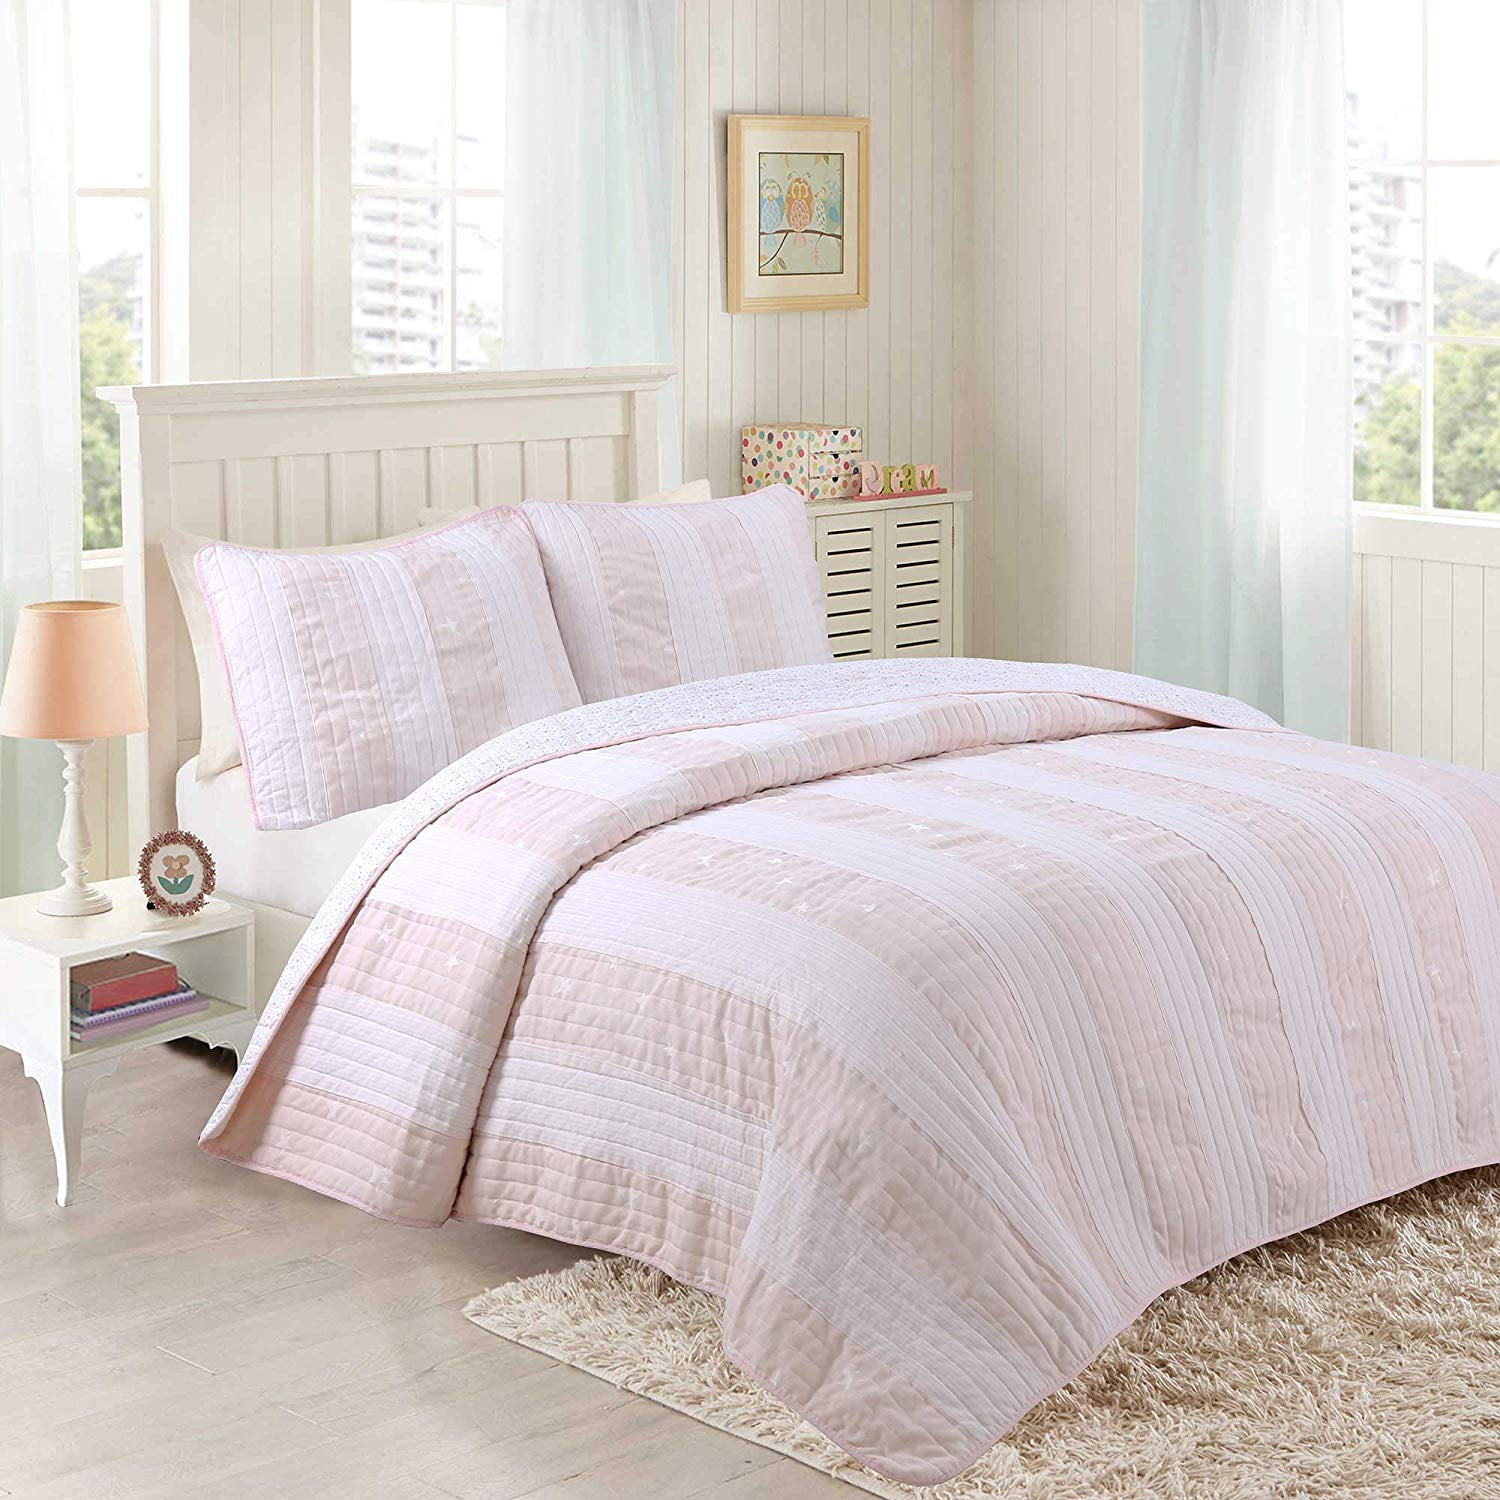 1 Piece Beautiful Lightweight Linen Quilt Twin Traditional Hand Stitched Top Print Modern Contemporary Aesthetic Light Pink Bedding Diamond Pattern Elegant Solid Color Soft Cozy Clubby Look Casual 